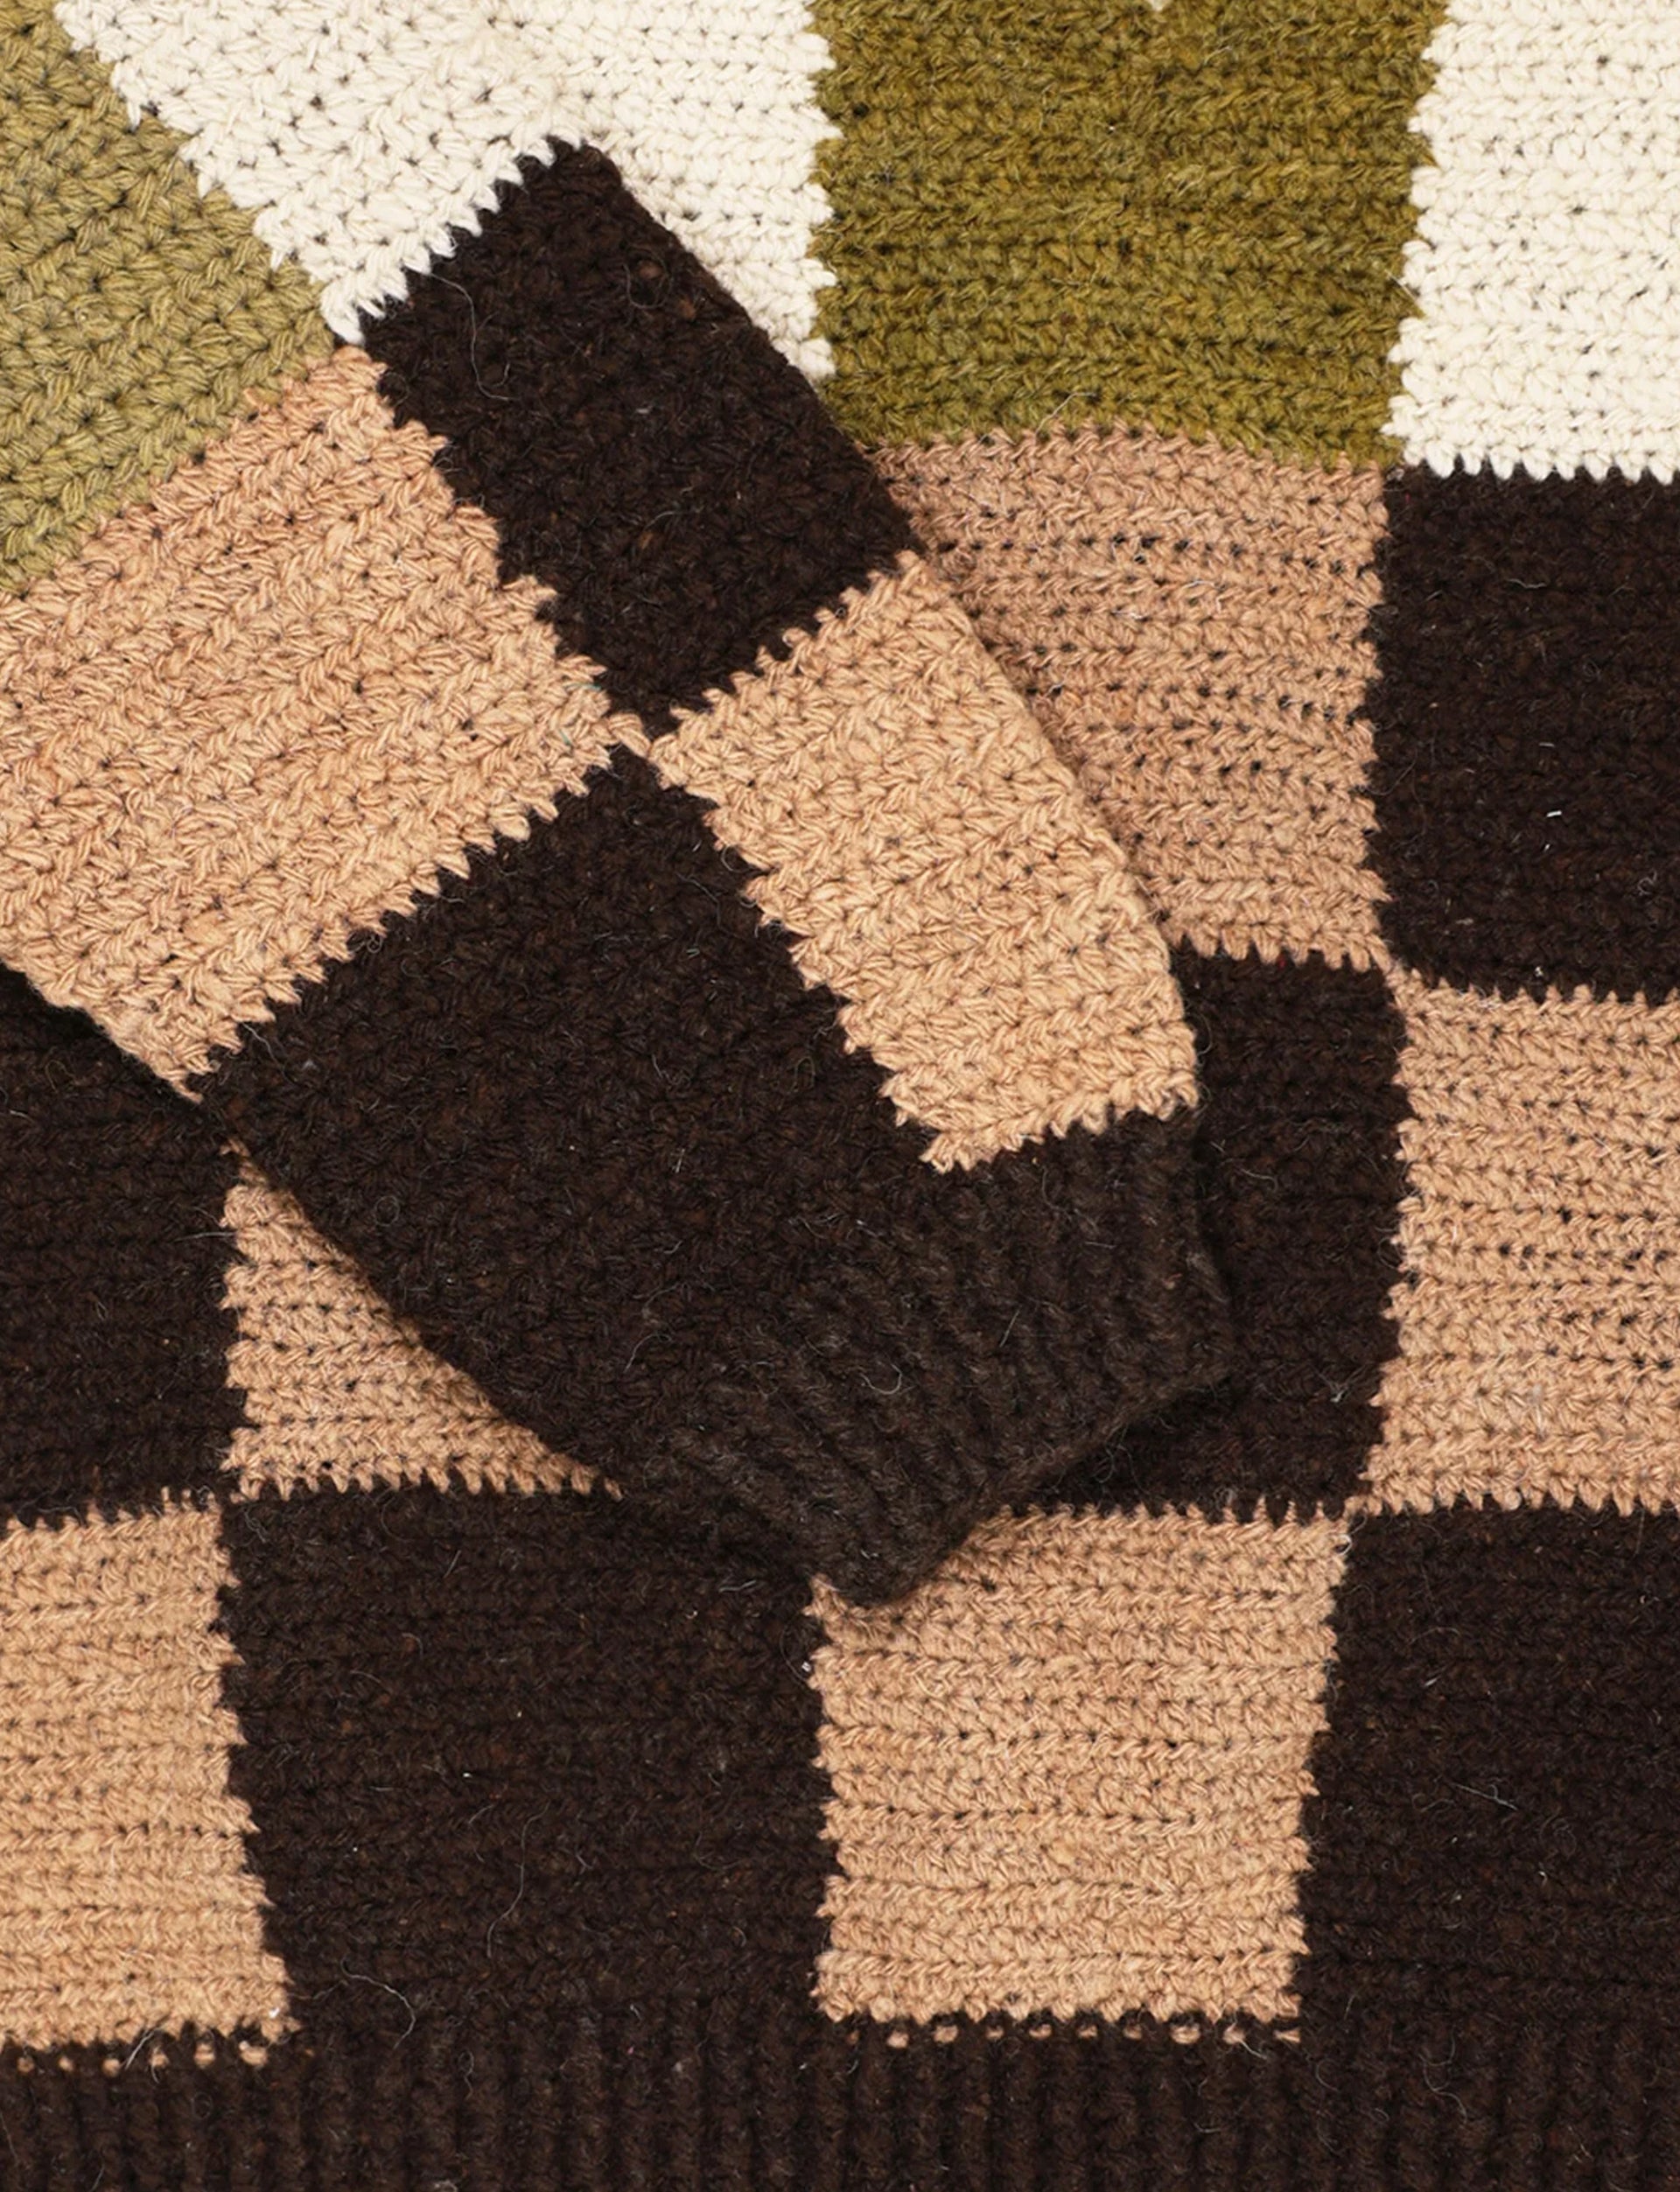 KARU RESEARCH RUGBY SWEATER BROWN HAND KNIT